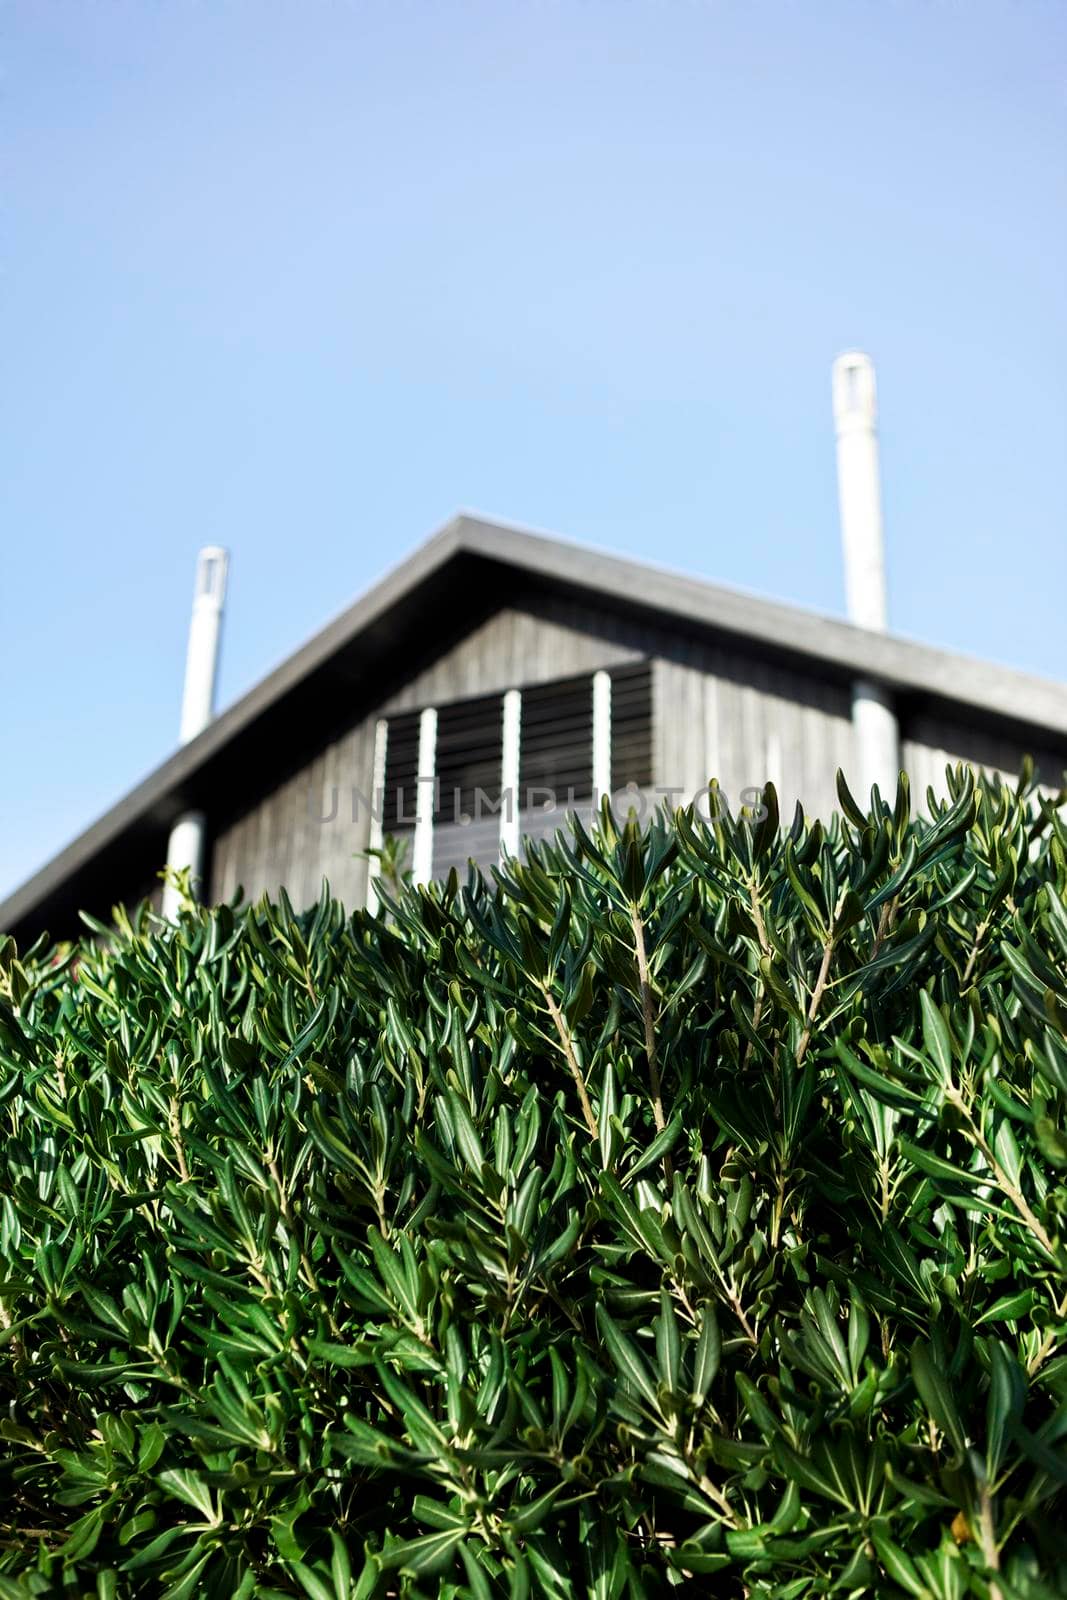 Hedge of shrubs in front of a modern house